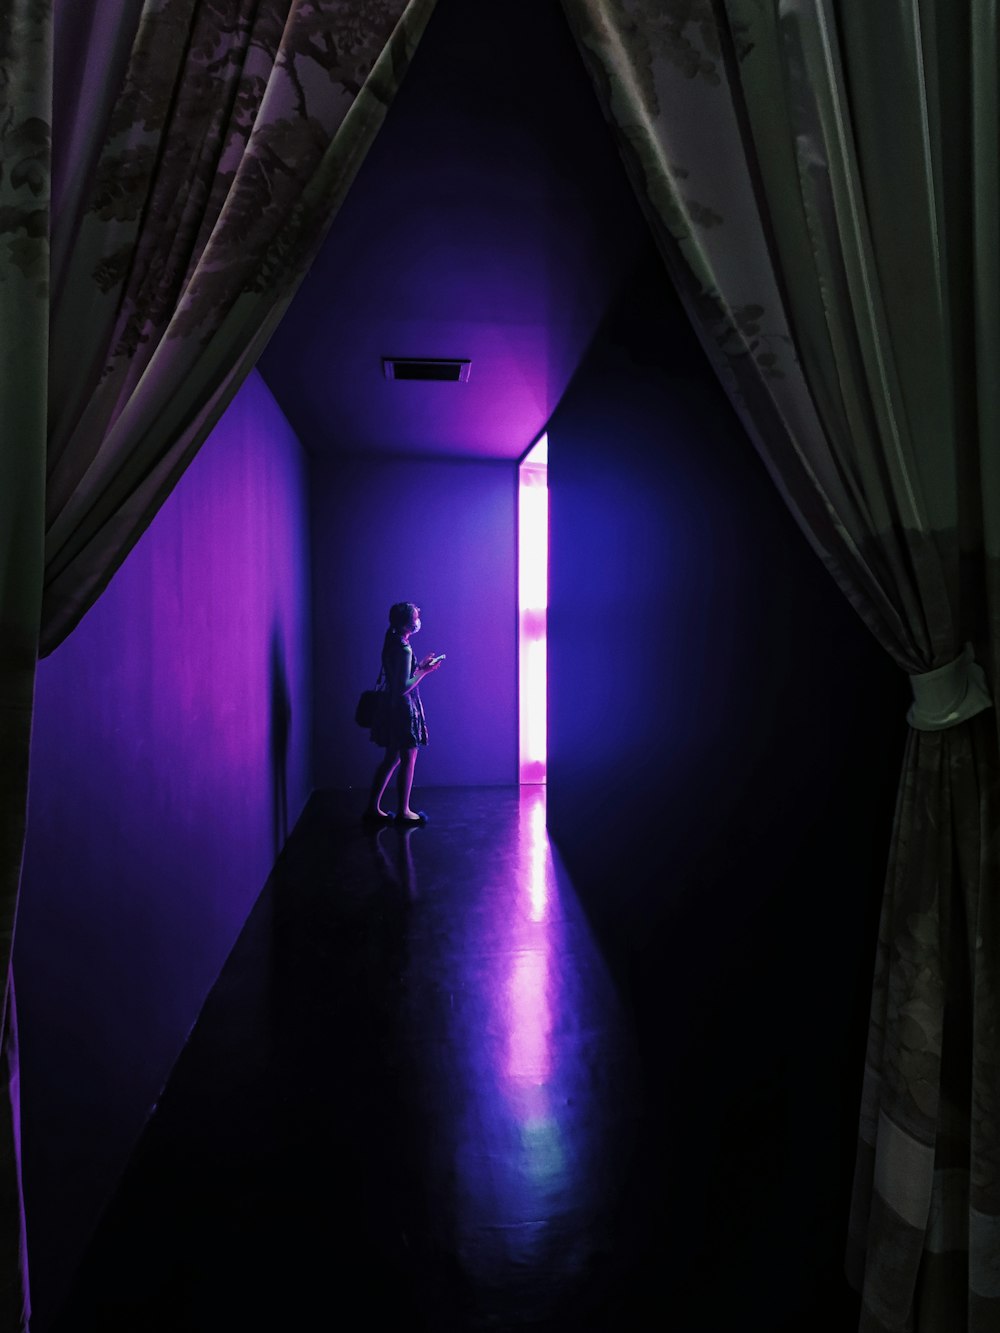 a person standing in a dark room with a purple light